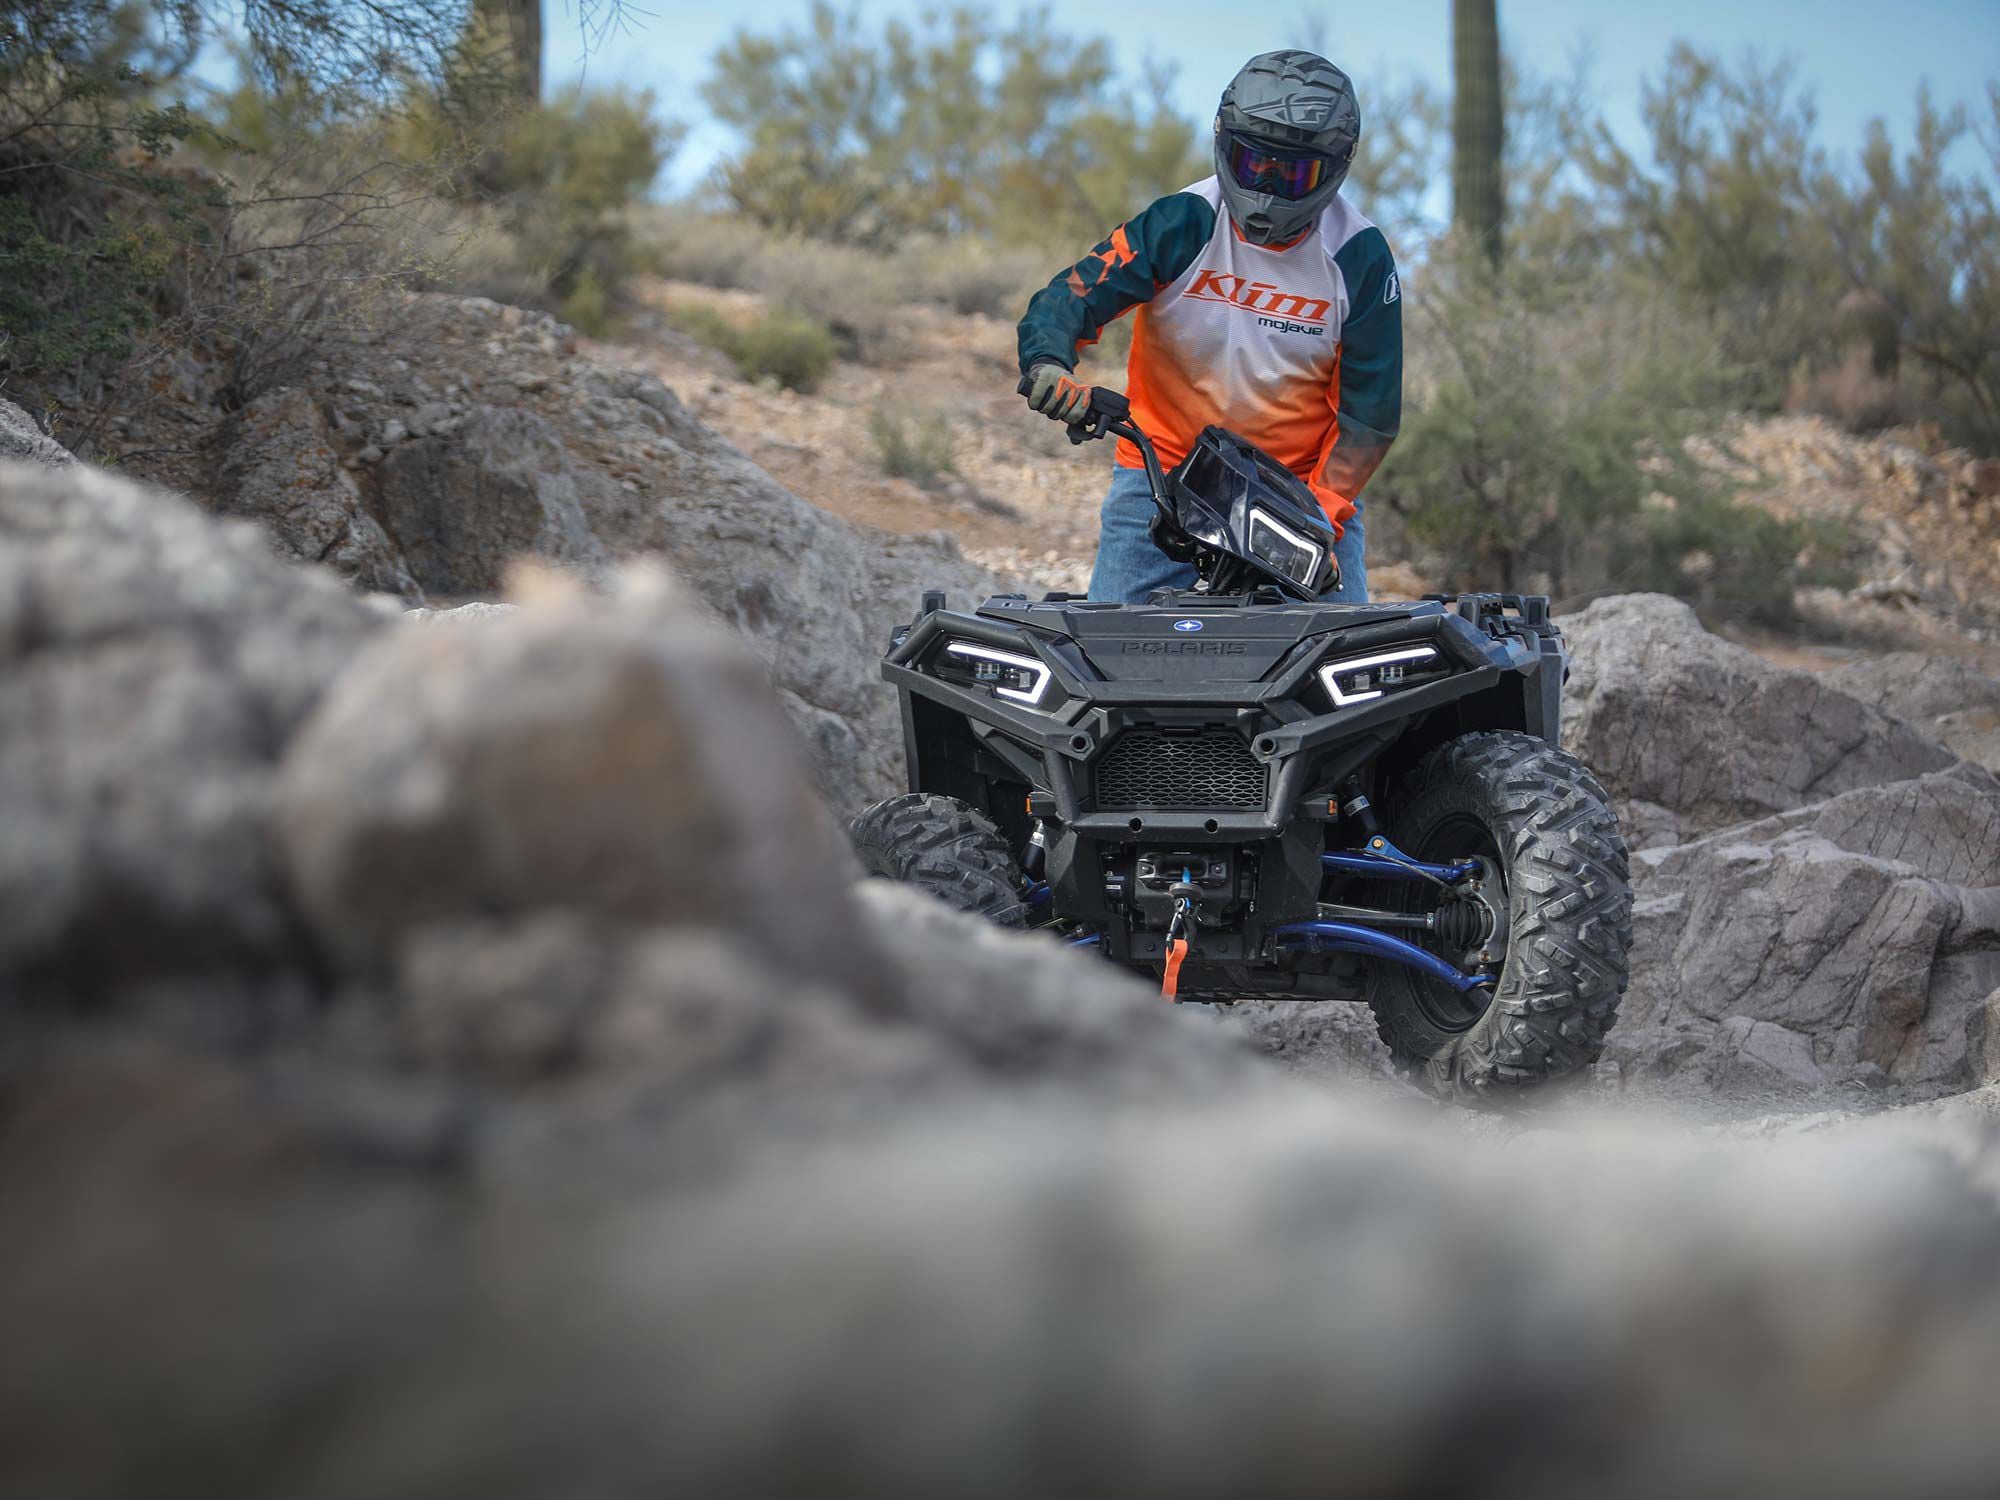 Multi Select Electric Power Steering gives the Sportsman XP 1000 a light feel at the controls.